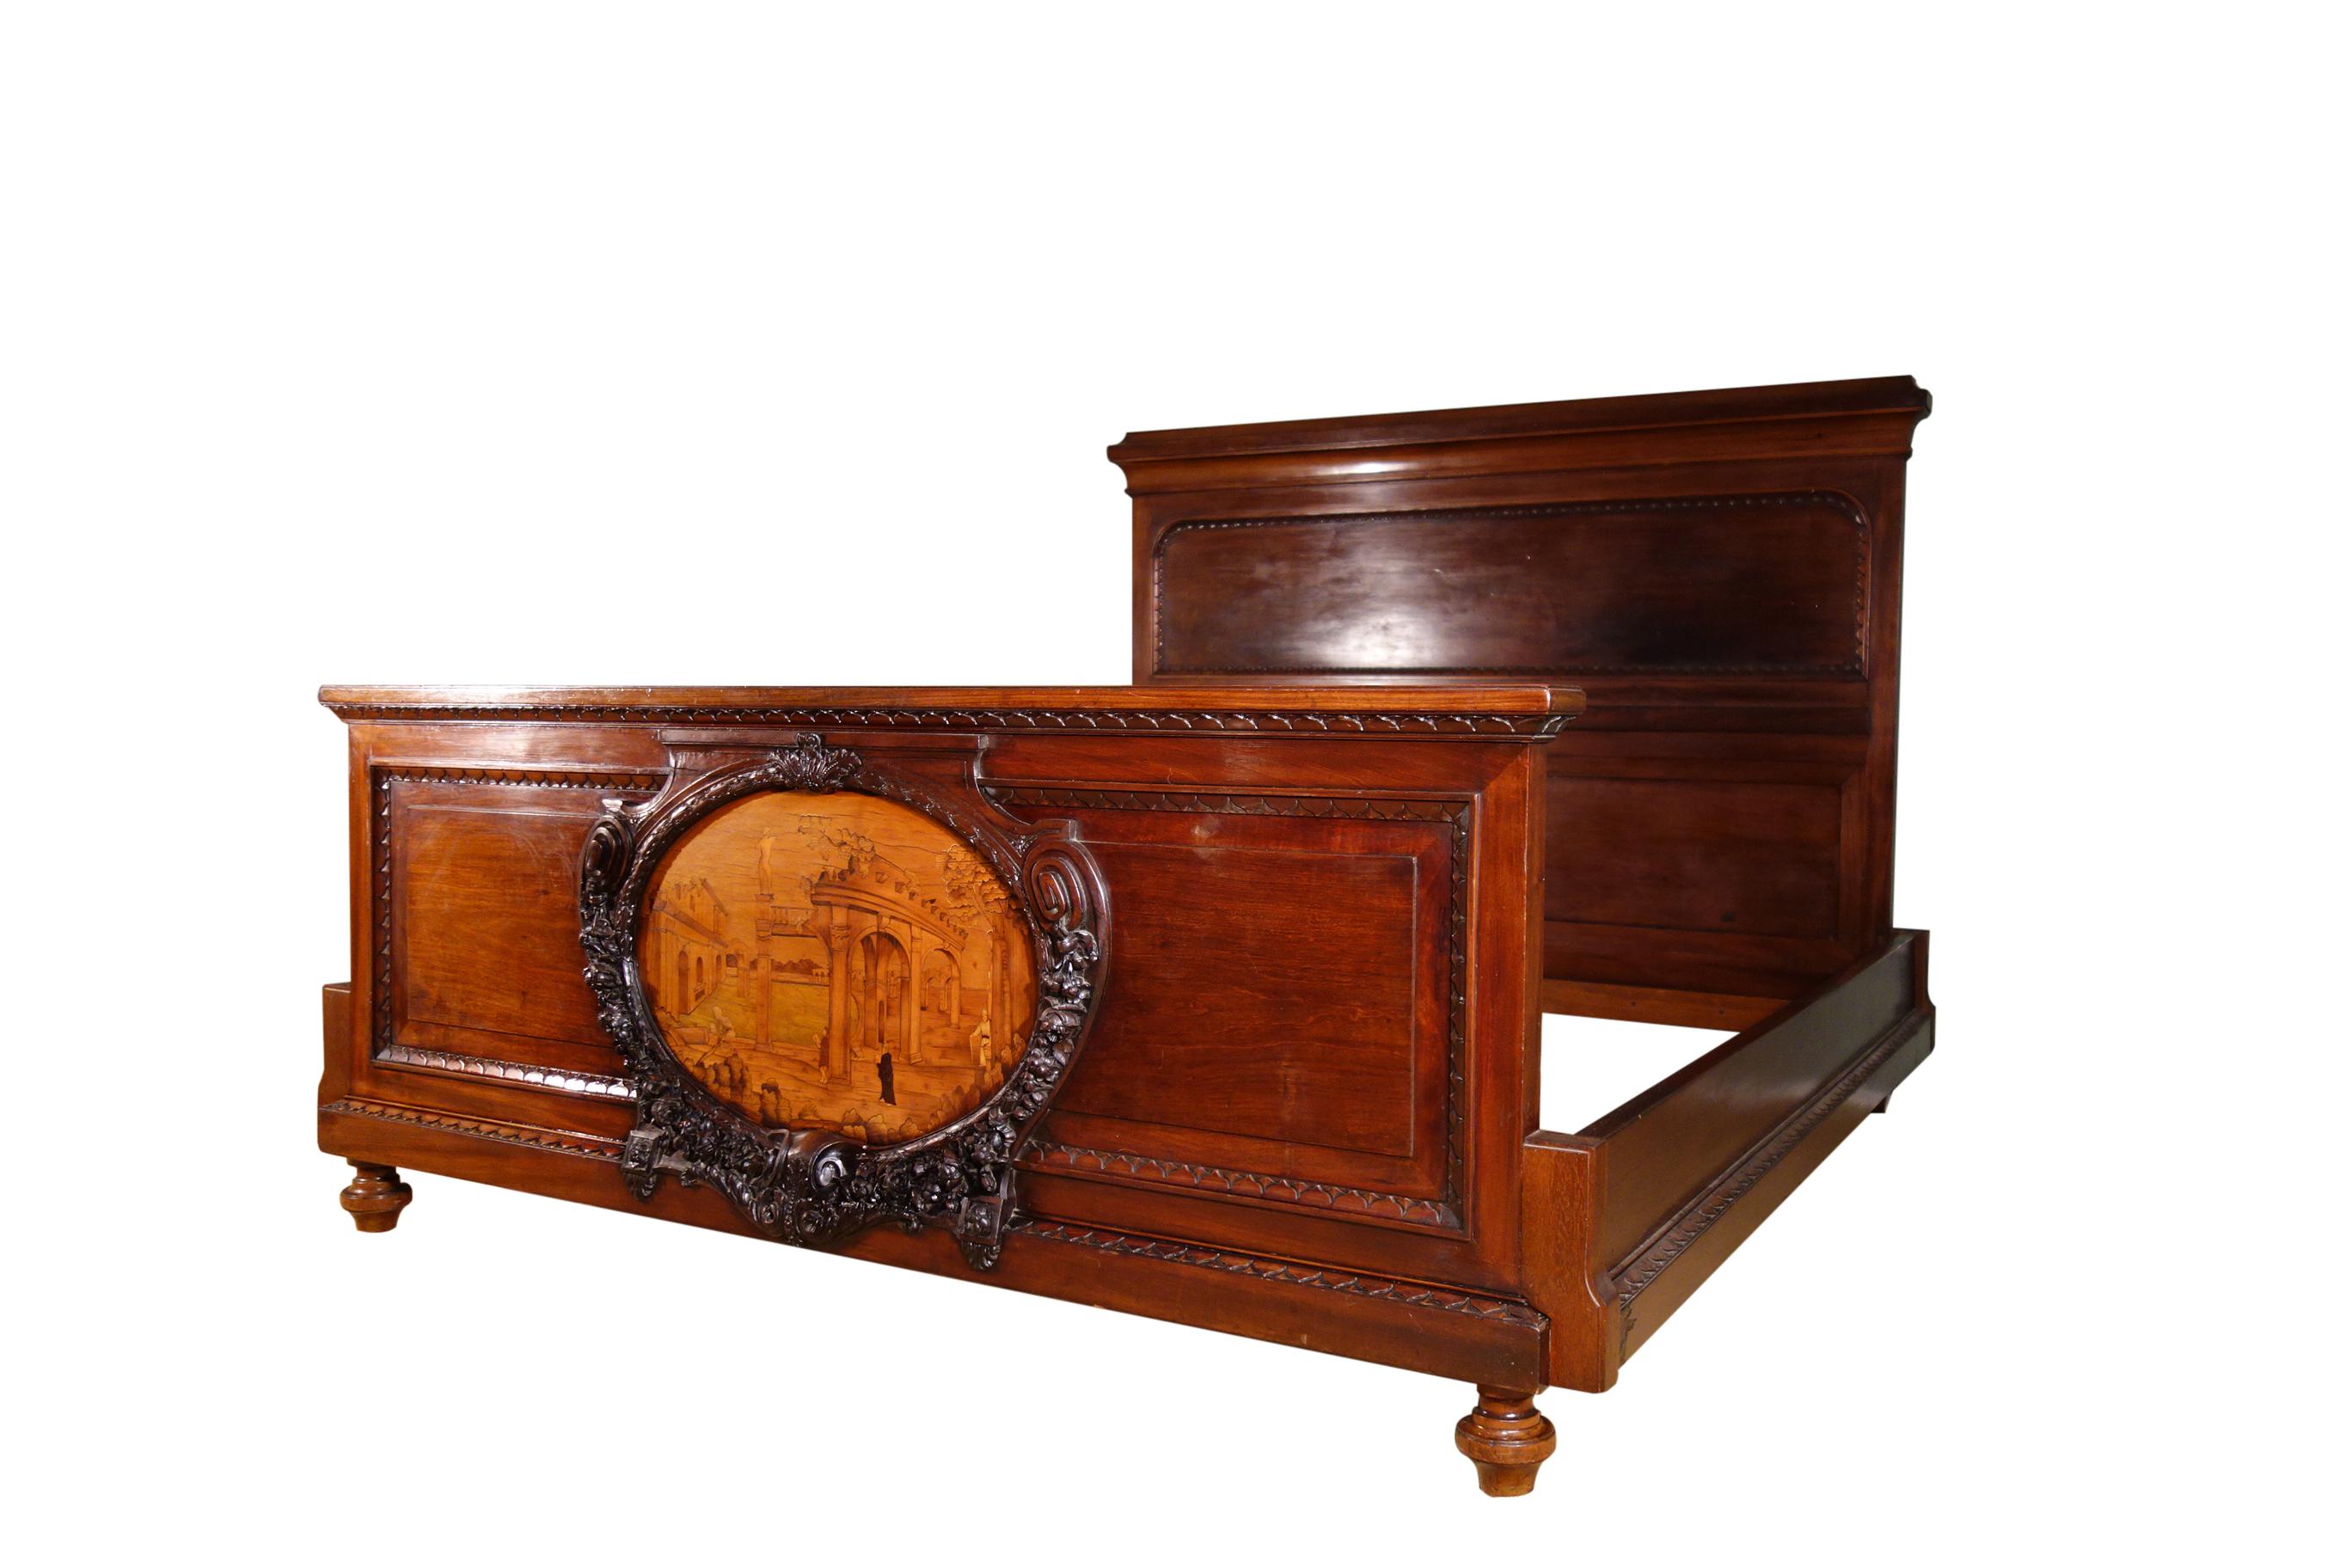 Impressive 19th century bed frame finely crafted of mahogany solids, including large older period salvage medallion of perspective marquetry composed in a variety of wood inlay species, attributed to the Giovanni Maffezzoli school ( circa